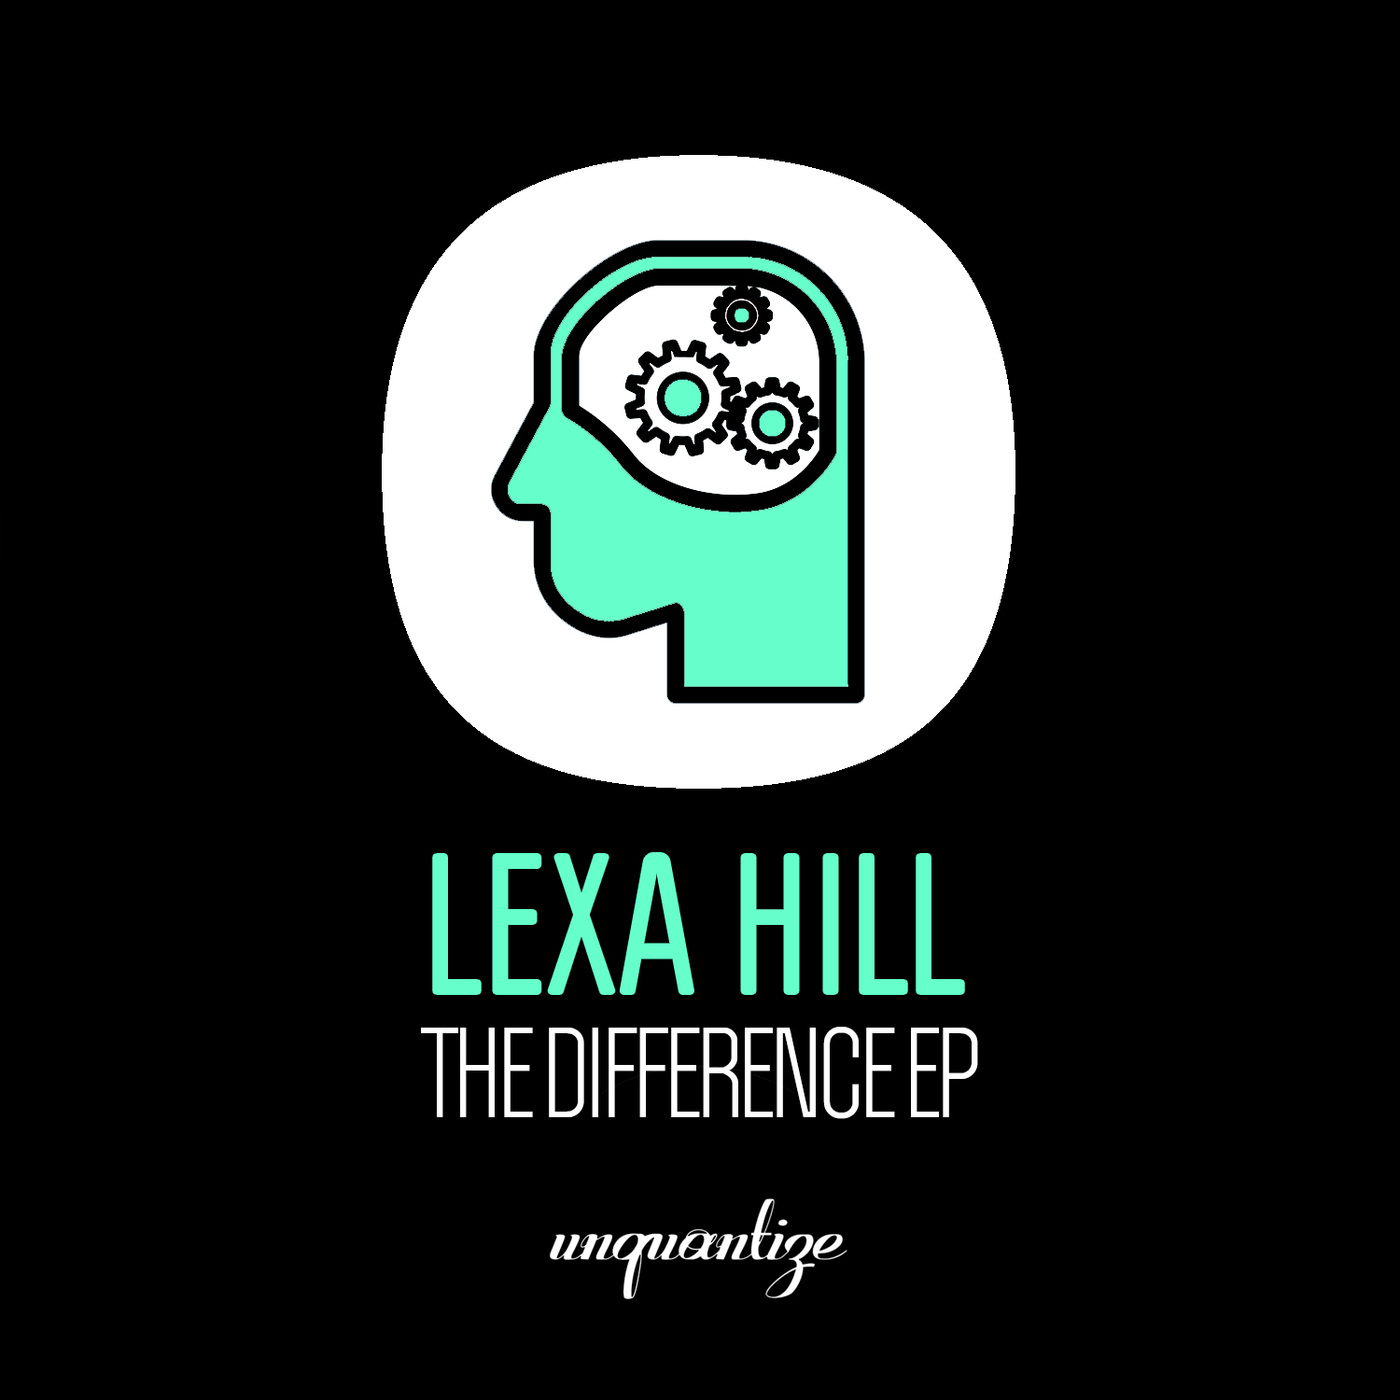 Lexa Hill - The Difference EP / unquantize